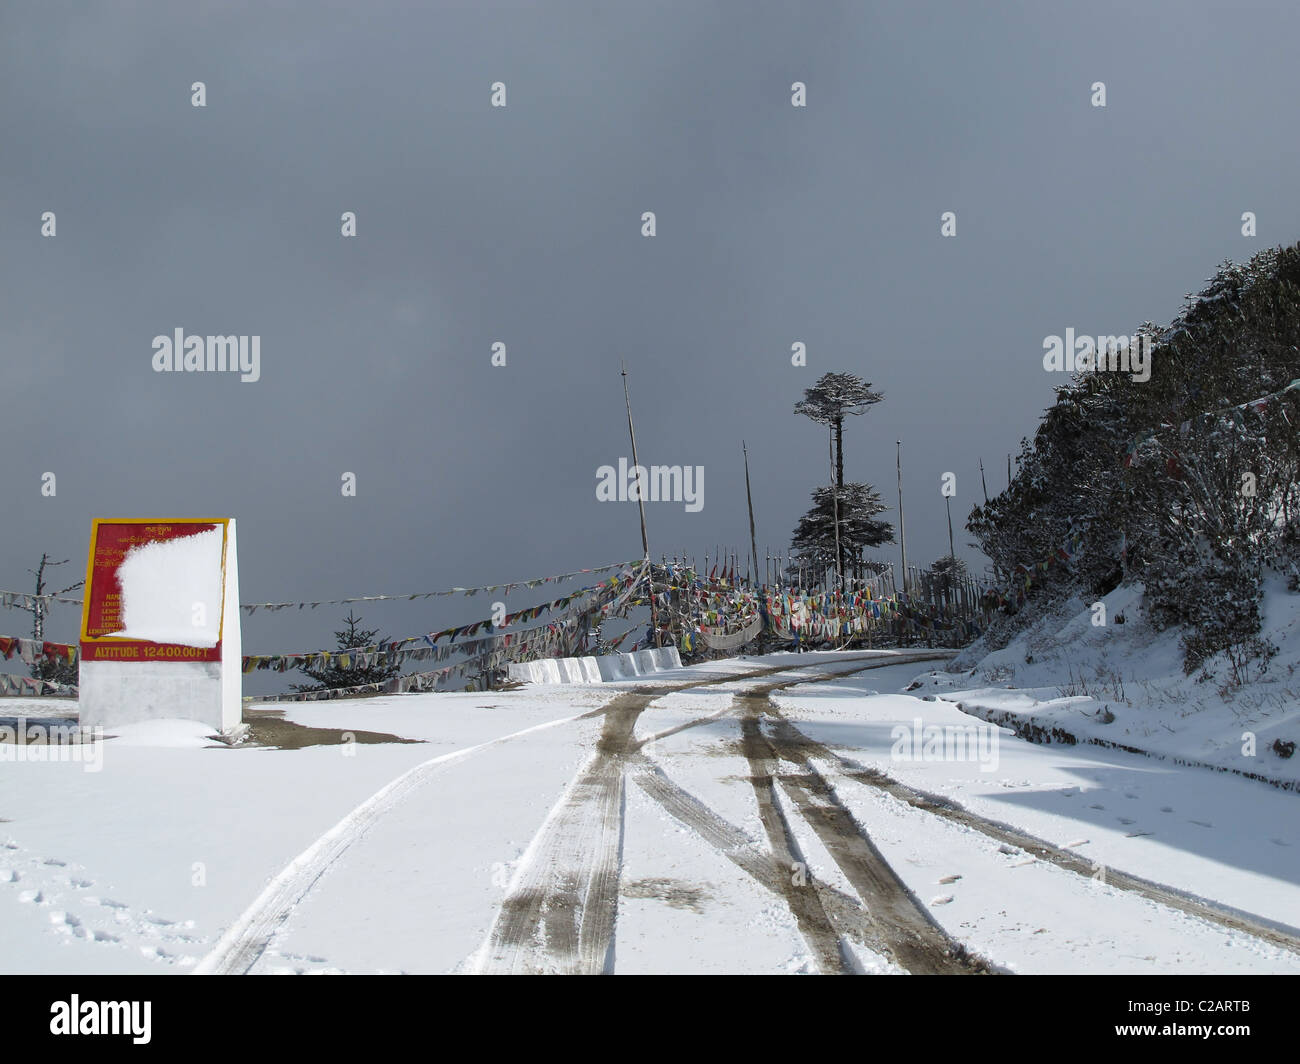 Roas in the snow, sign and prayer flags at Thrumshingla Pass, the border between central and eastern Bhutan Stock Photo